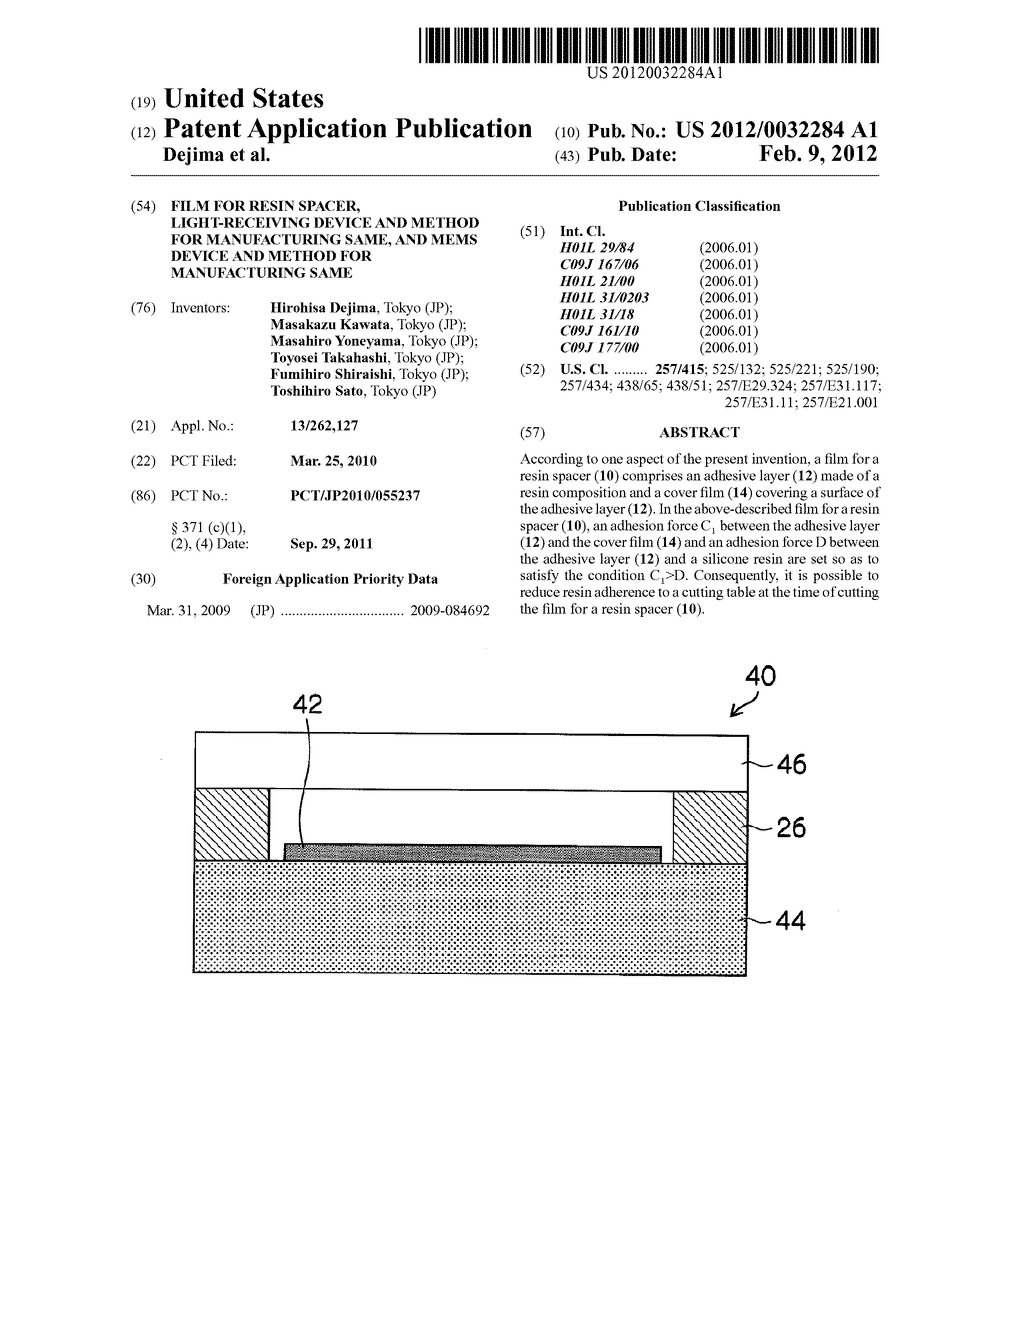 FILM FOR RESIN SPACER, LIGHT-RECEIVING DEVICE AND METHOD FOR MANUFACTURING     SAME, AND MEMS DEVICE AND METHOD FOR MANUFACTURING SAME - diagram, schematic, and image 01